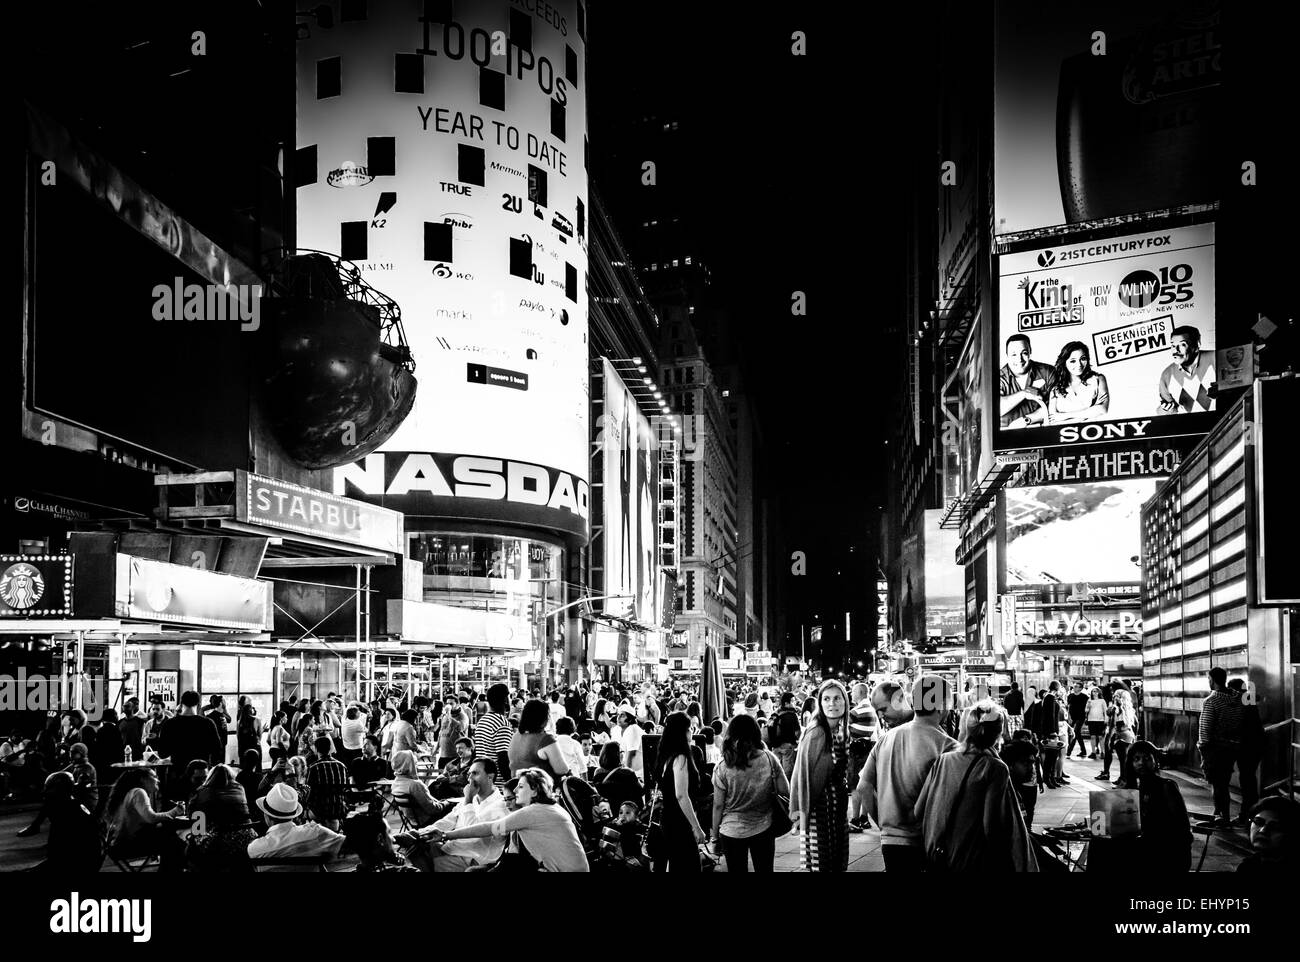 NEW YORK CITY - 24. August 2014: Times Square bei Nacht in Midtown Manhattan, New York am 24. August 2014. Times Square ist ein ma Stockfoto